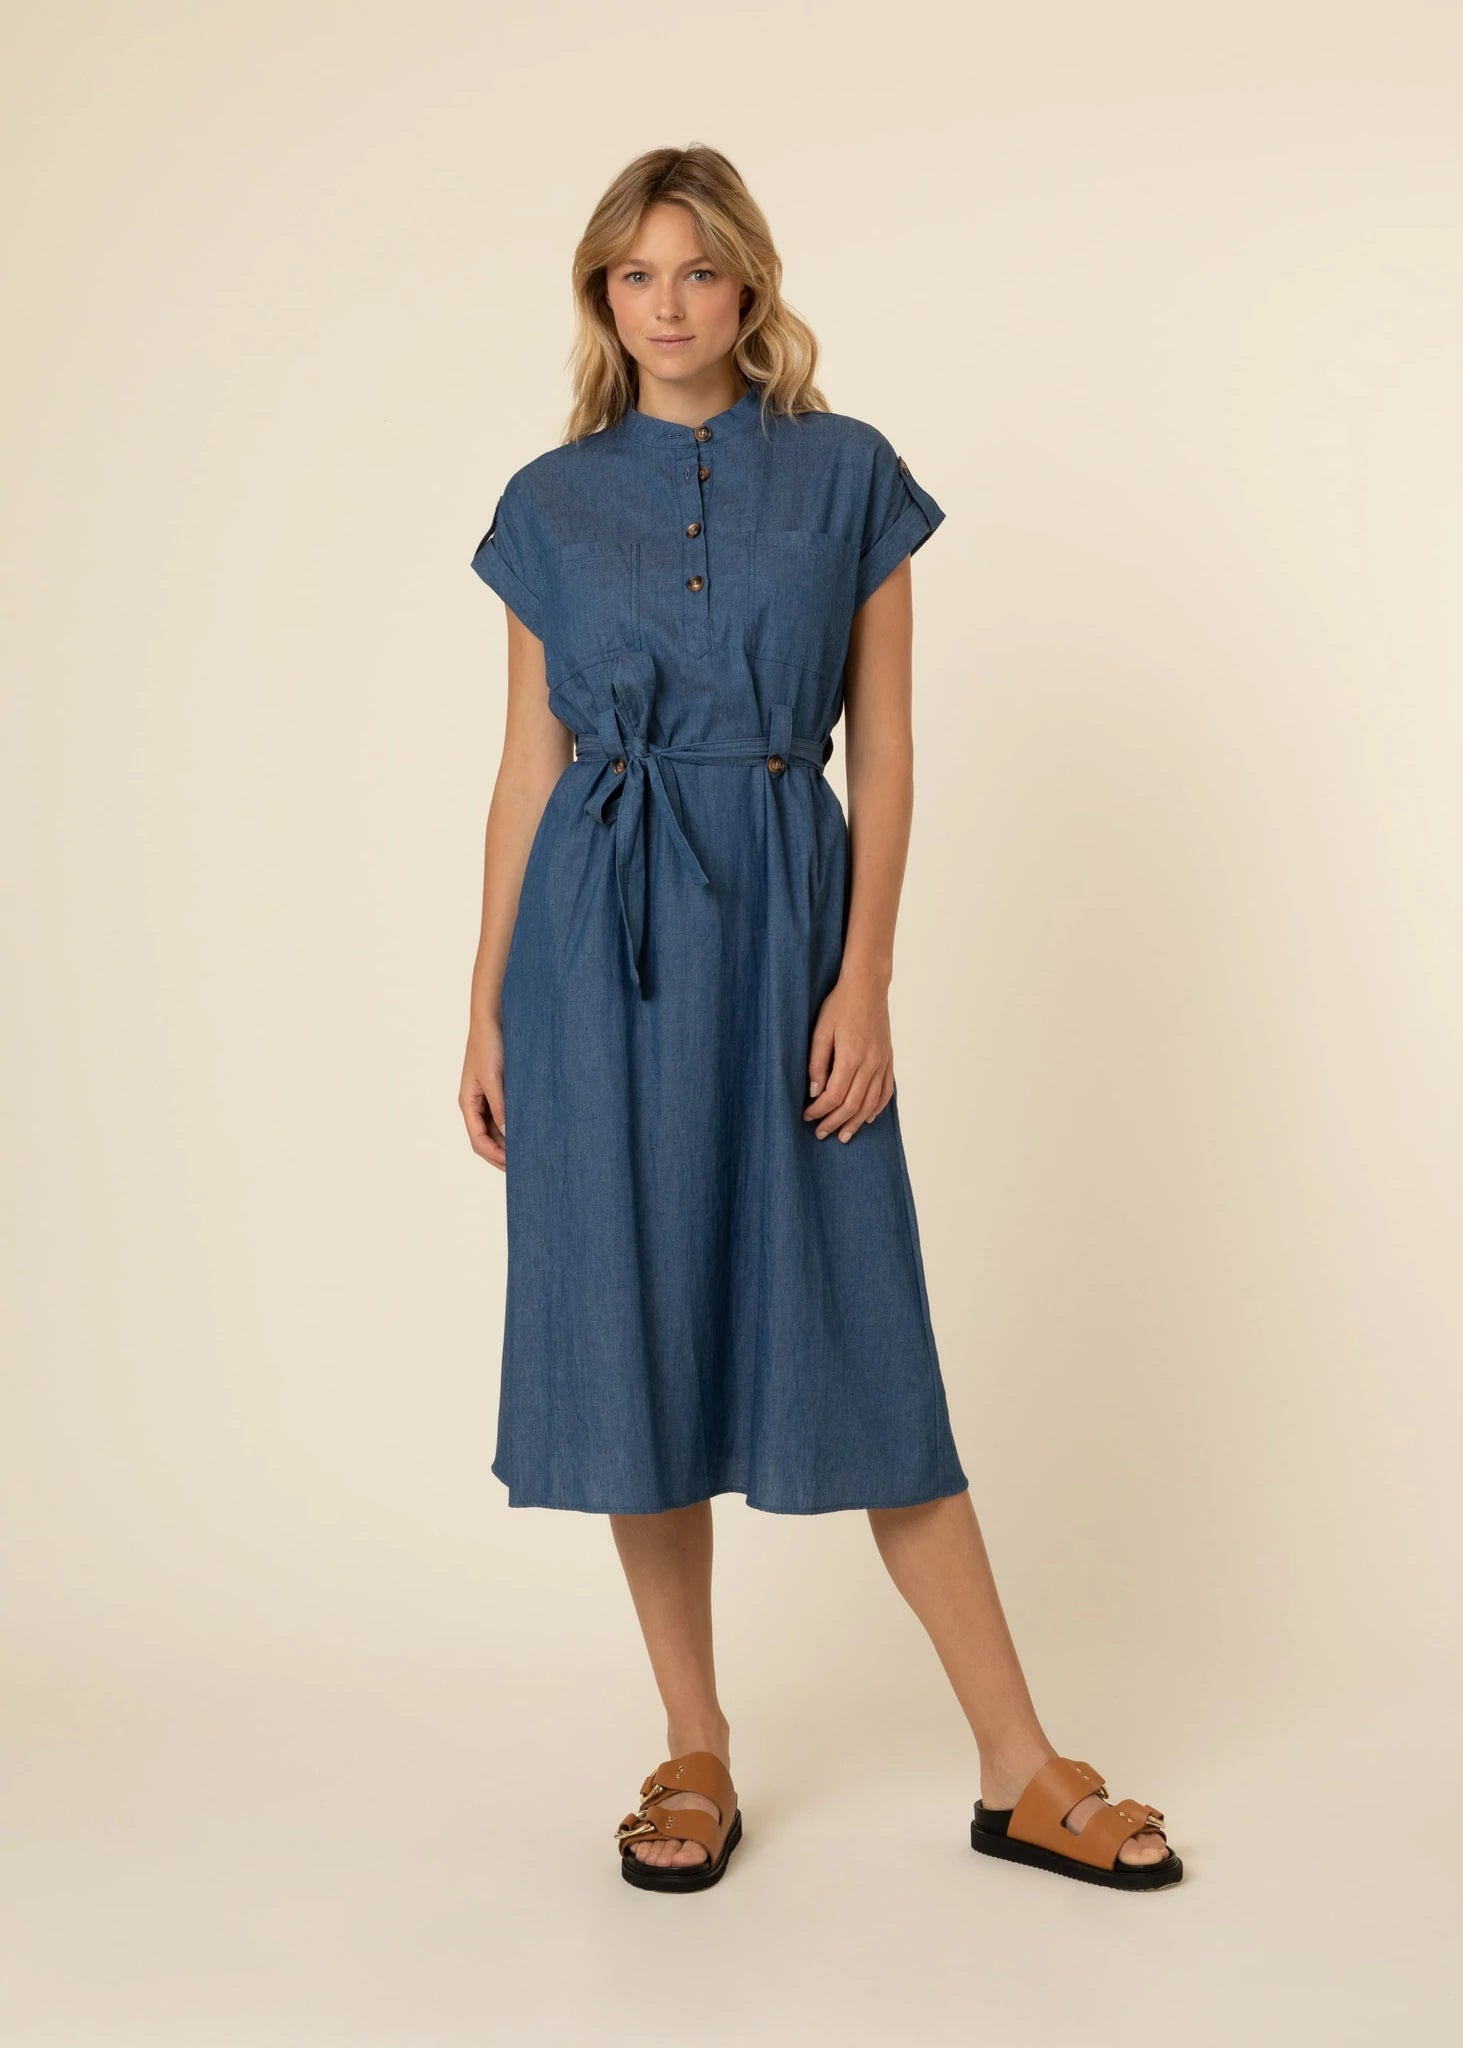 The Mallaury Buttoned Midi Dress by FRNCH